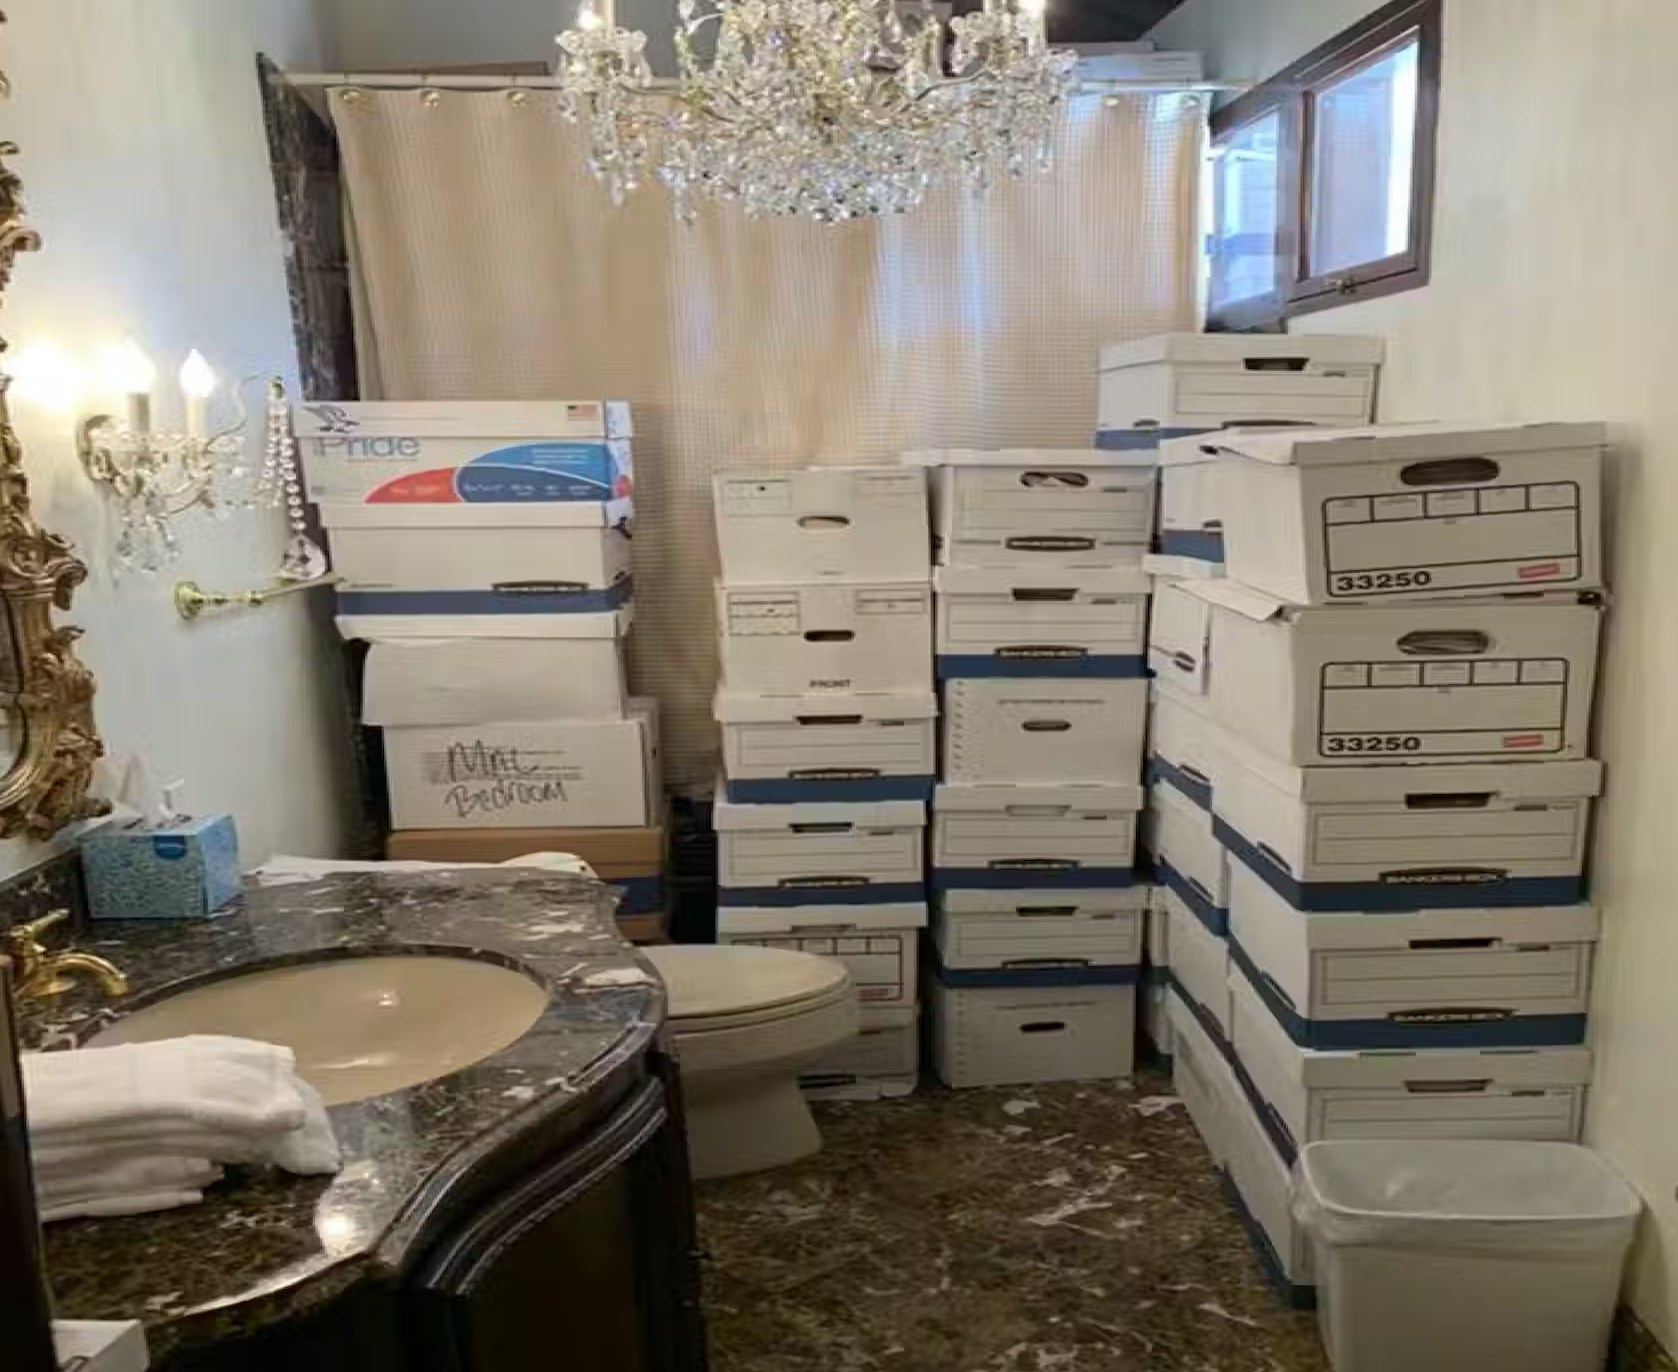 The Trump federal indictment includes this photo of boxes of records stored in a bathroom and shower at Trump’s Mar-a-Lago estate in Palm Beach, Fla. Justice Department via AP